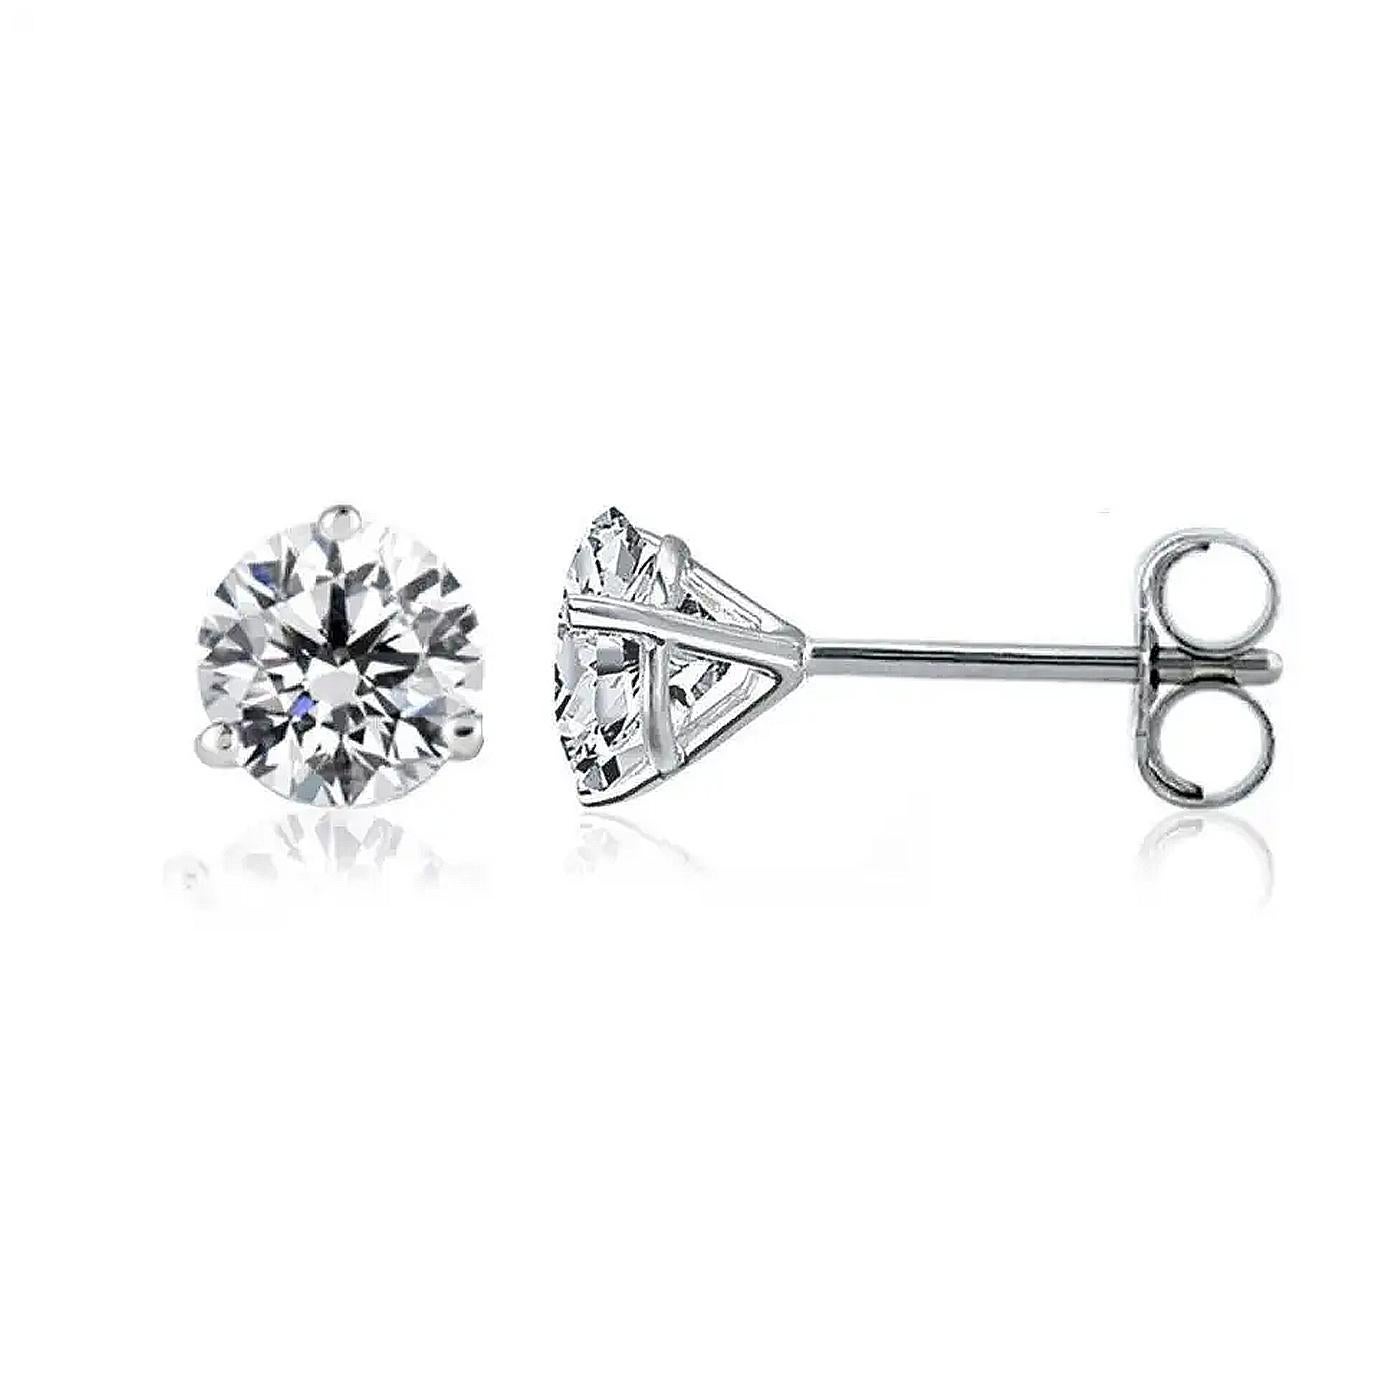 An attractive alternative to traditional stud earrings, martini settings lend all of their glory to the featured diamond within. The minimalist design consists of a 4 prong, funnel-shaped wire setting, most of which remains hidden behind the diamond